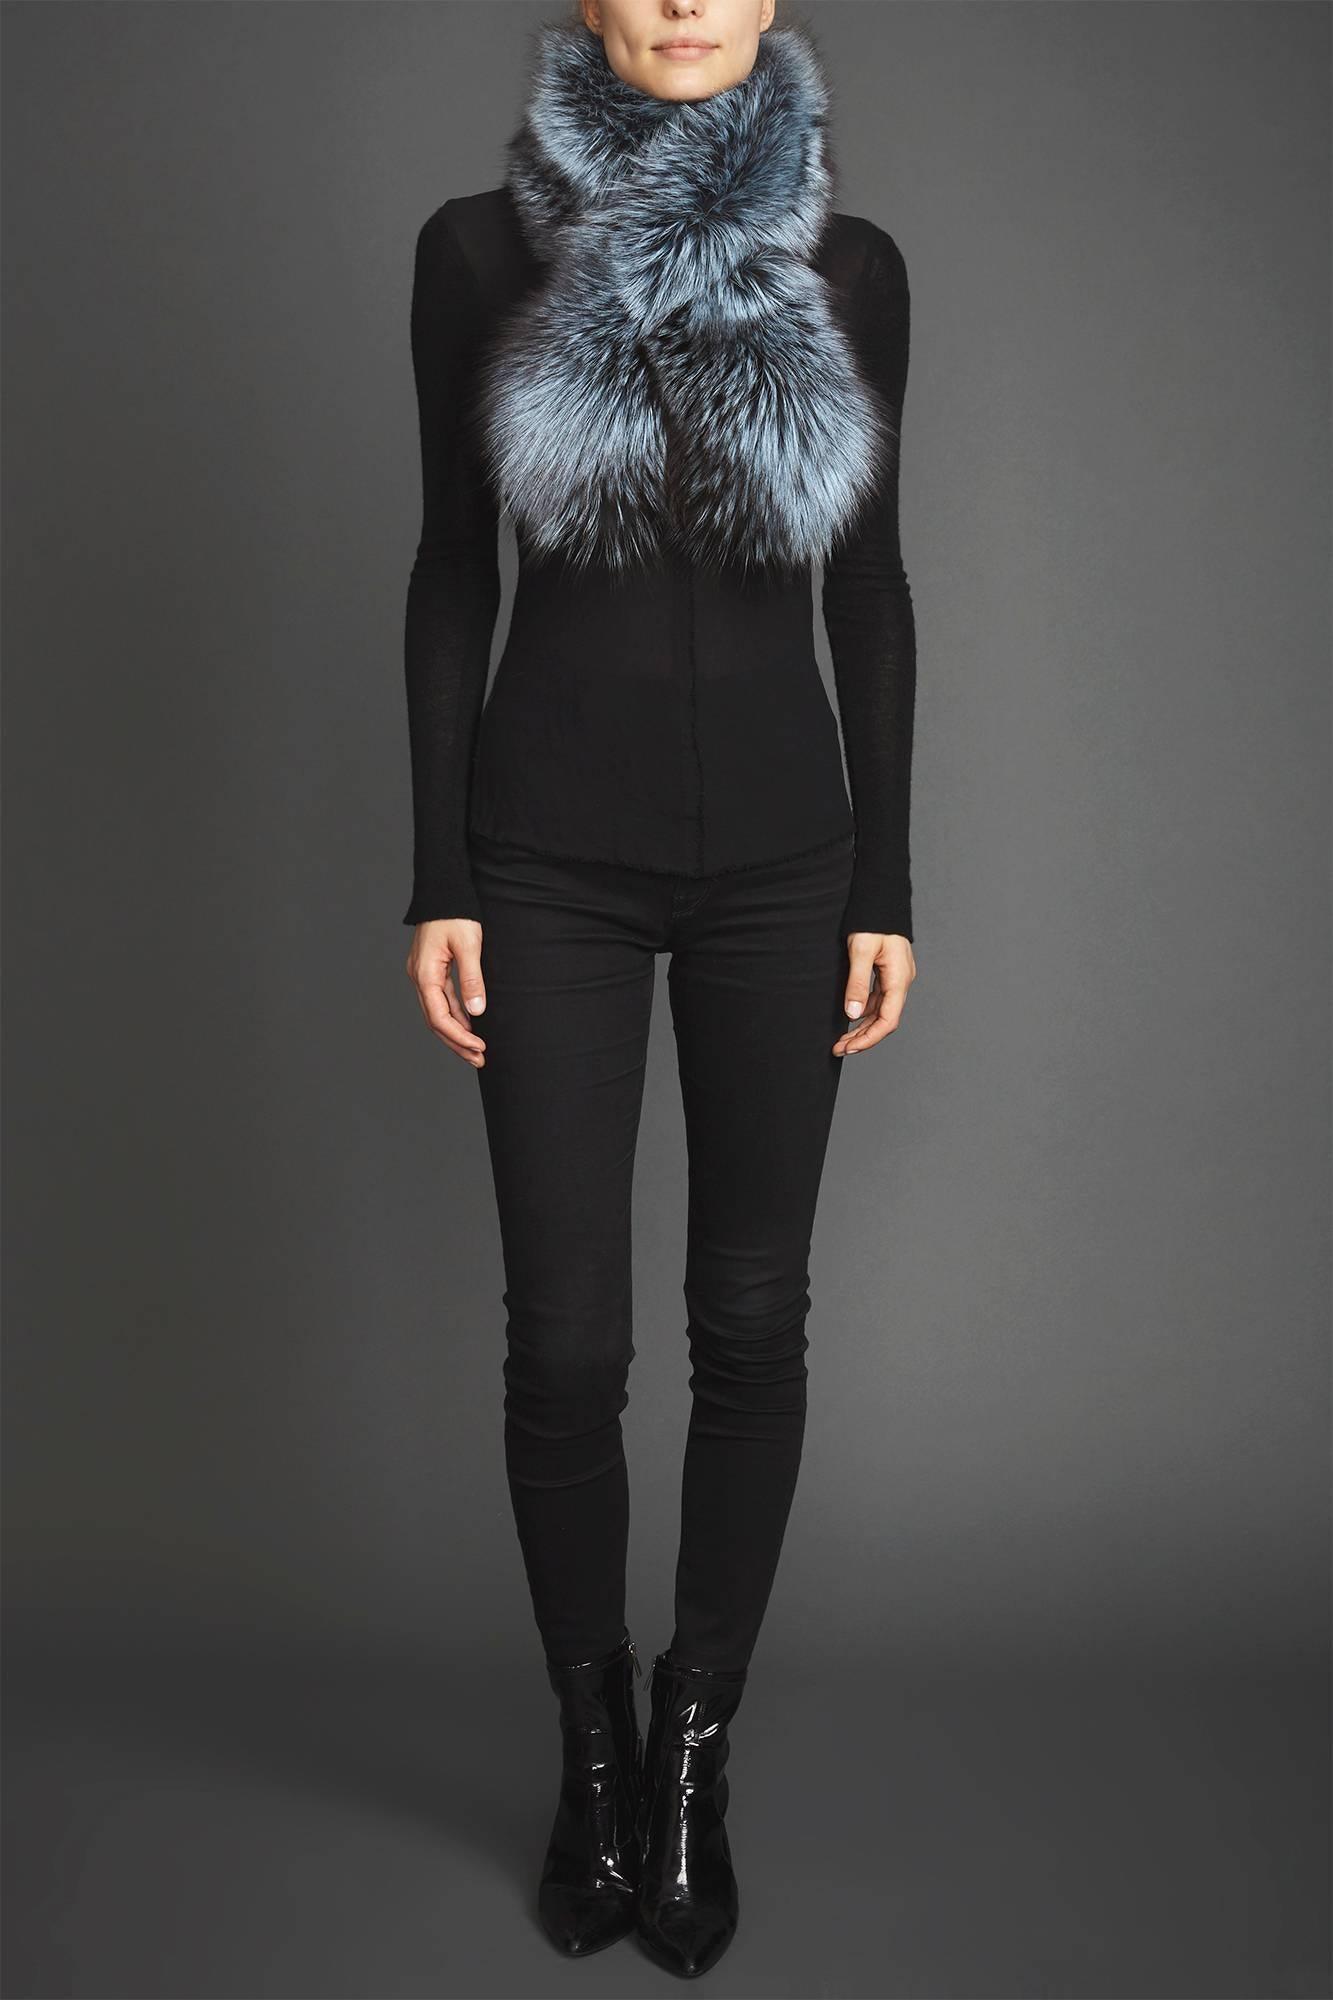 Verheyen Lapel Cross-through Collar in Iced Topaz Fox Fur - Valentines gift

The Lapel Cross-through Collar is Verheyen London’s casual everyday design, which is perfectly shaped to wear over any outfit. Designed for layering, this structured shape,